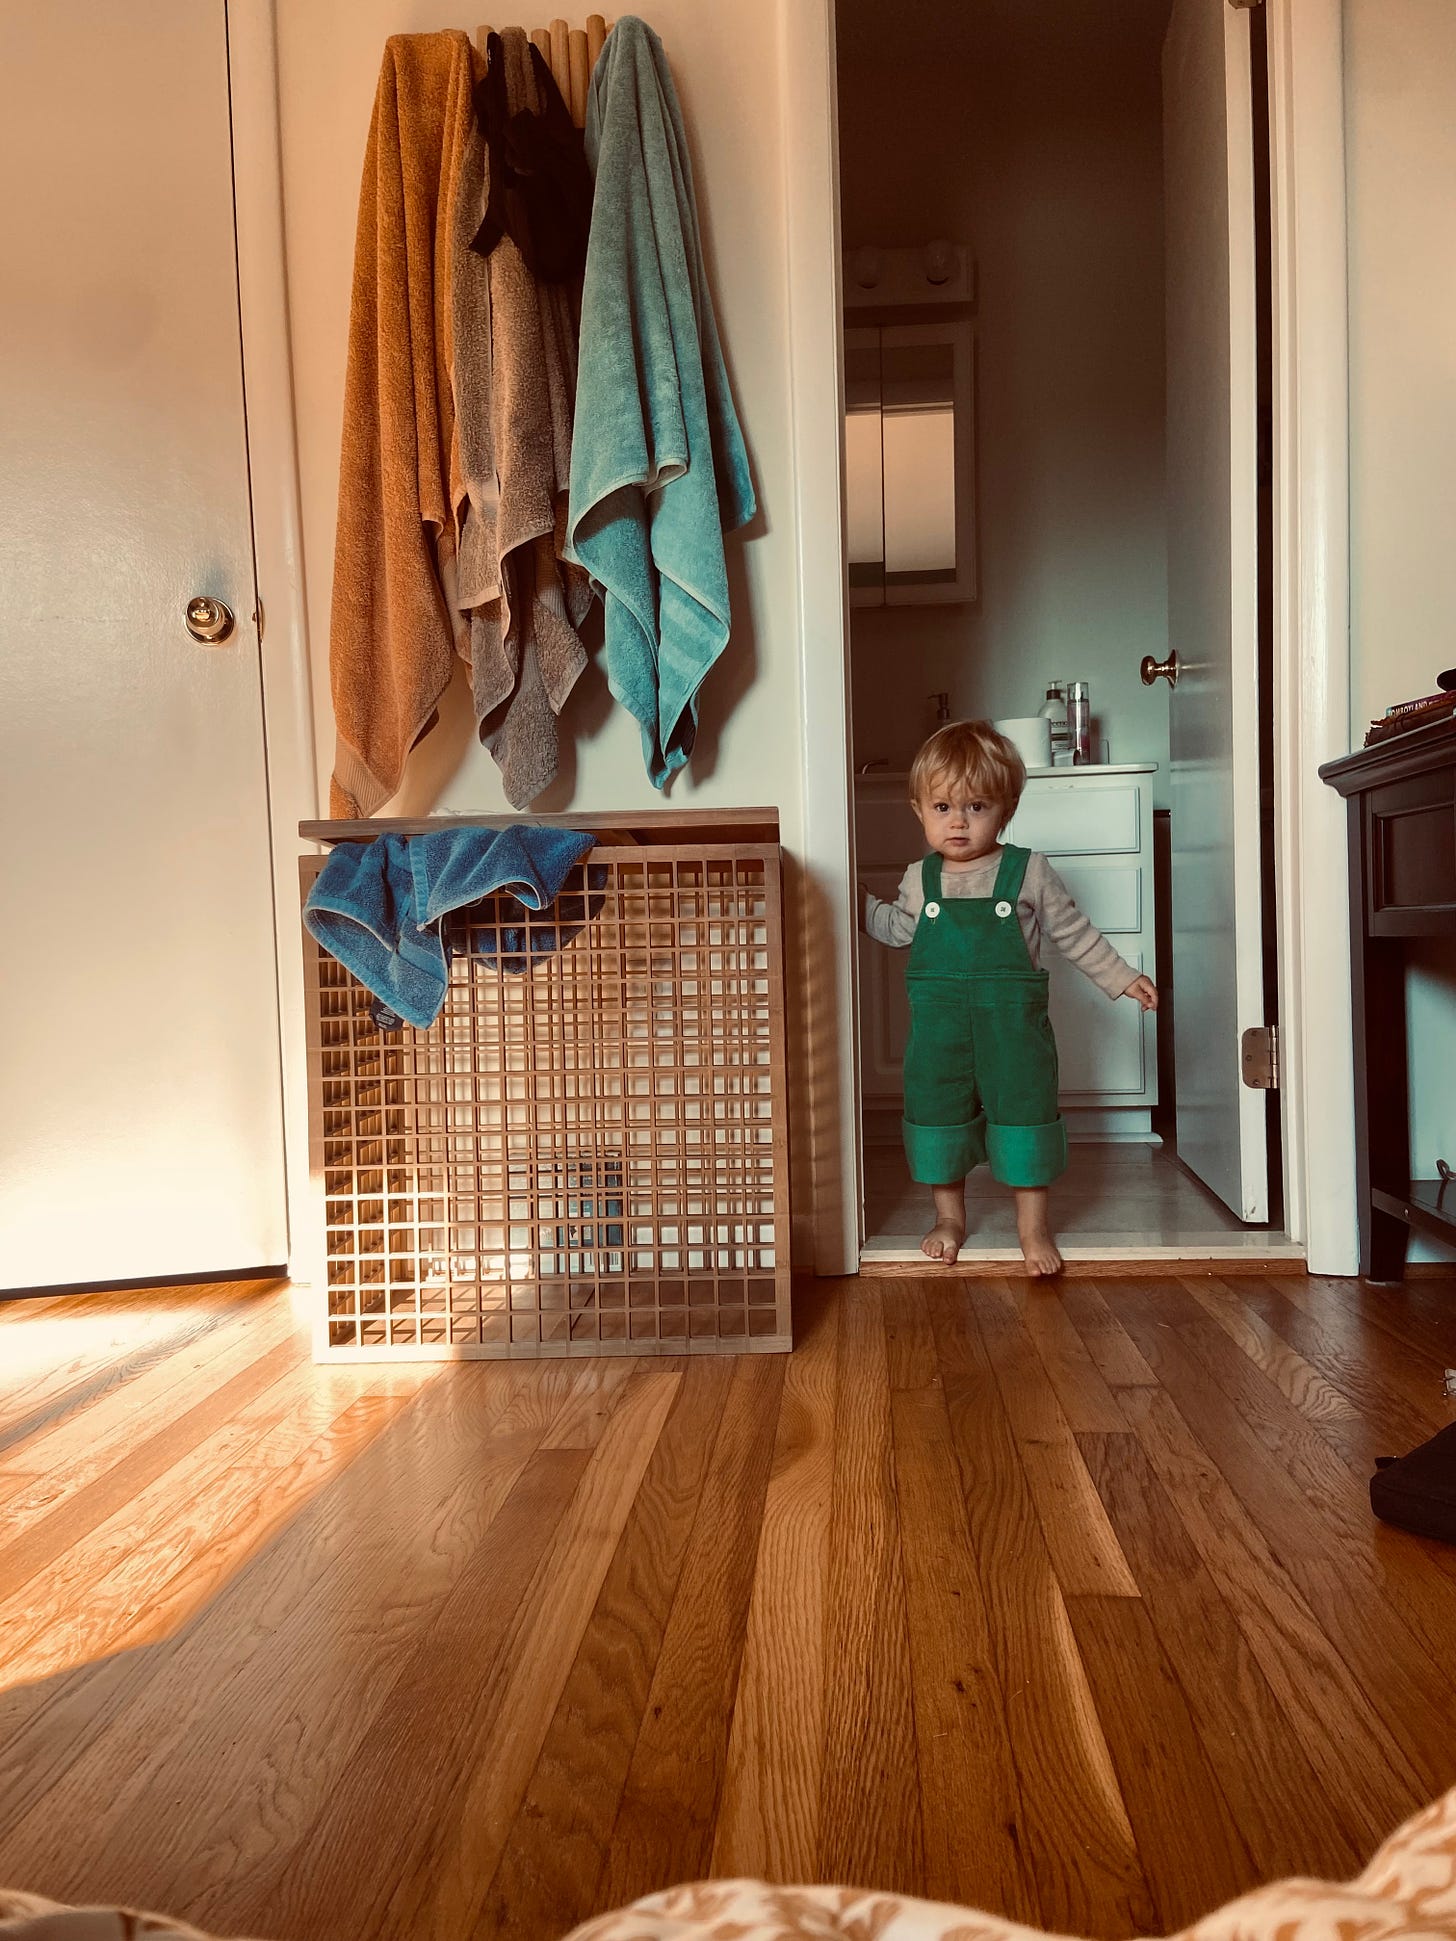 A child in green overalls is stepping over a doorway ledge into a room with white walls and a wooden floor. There is a closed door and wooden hamper to the left. There are three different colored towels hanging above the hamper while one is laying on the edge of the opening of the hamper.